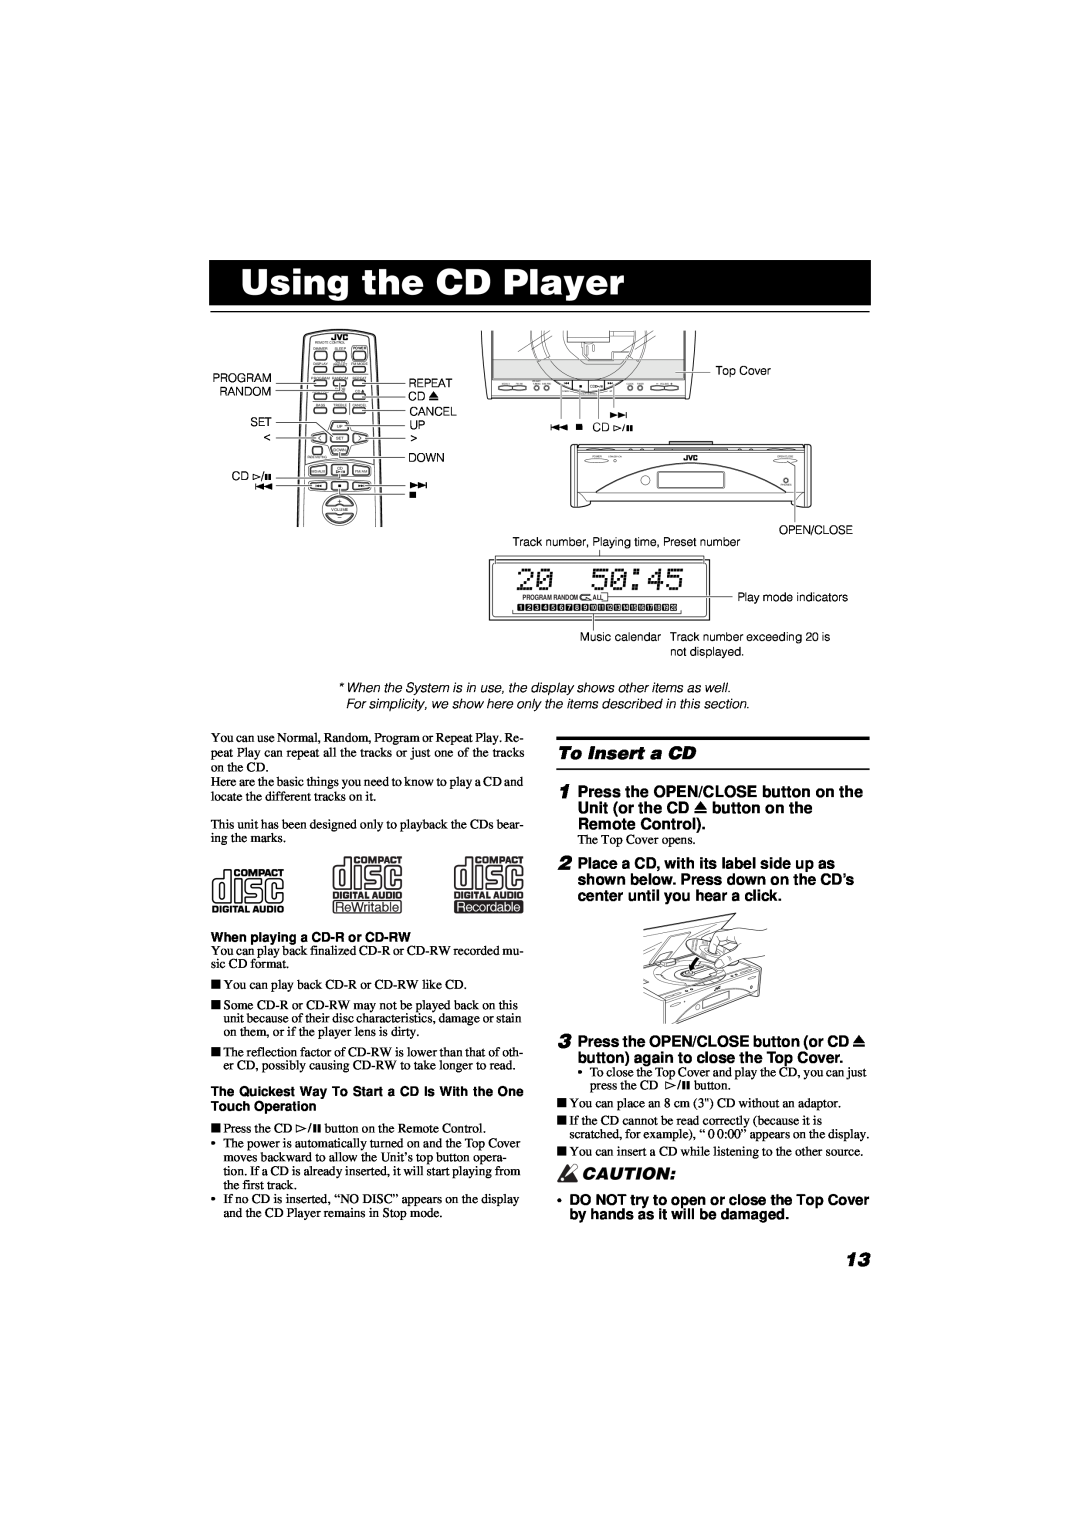 JVC FS-SD550, FS-SD990 manual Using the CD Player, To Insert a CD 